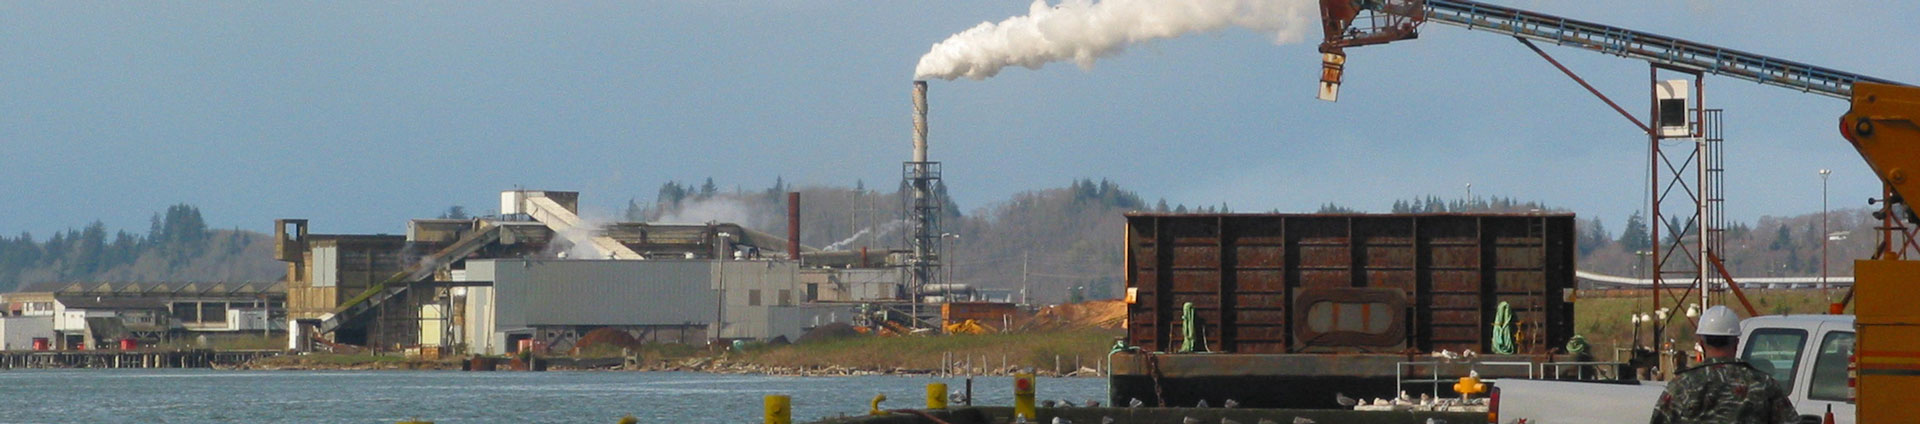 header image for business of port at grays harbor